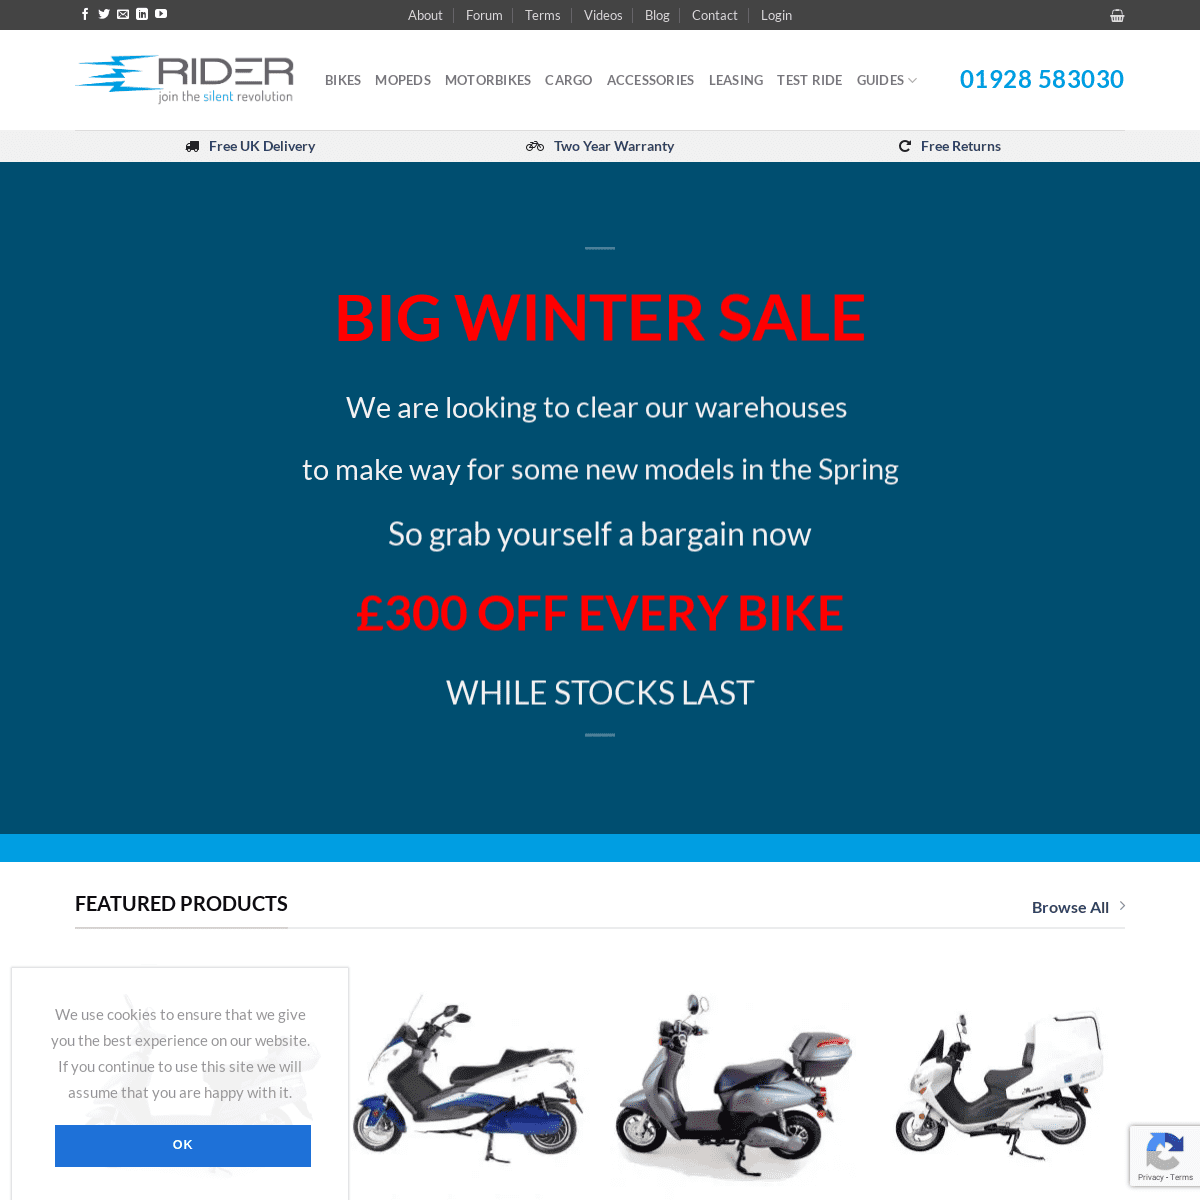 A complete backup of eriderbikes.com